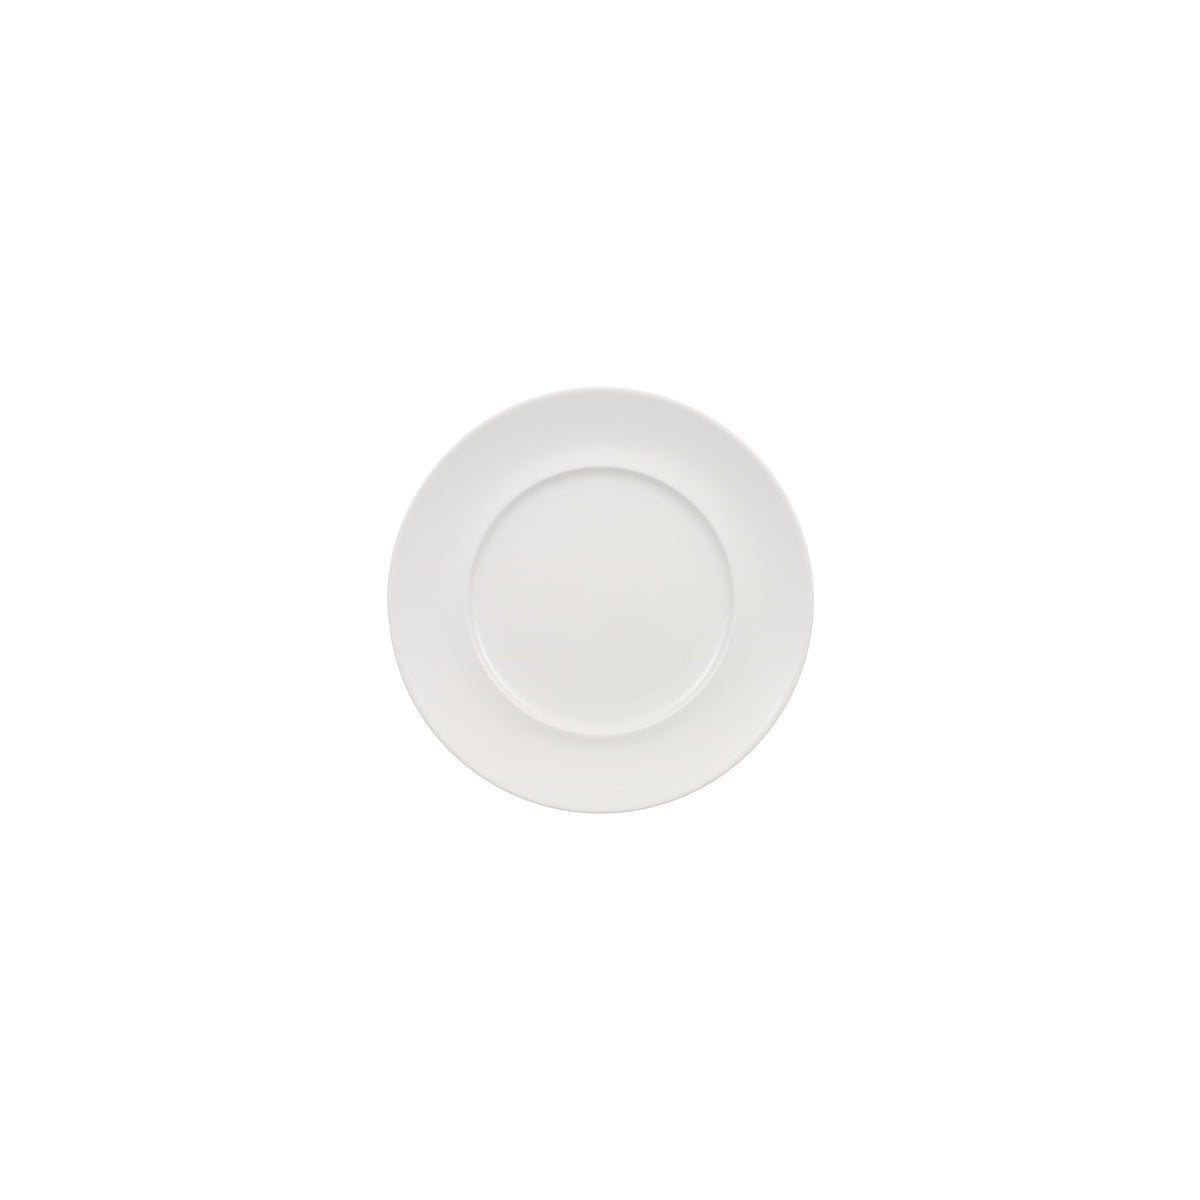 VB16-3275-2796 Villeroy And Boch Villeroy And Boch Marchesi White Plate Wide Rim 180mm Tomkin Australia Hospitality Supplies